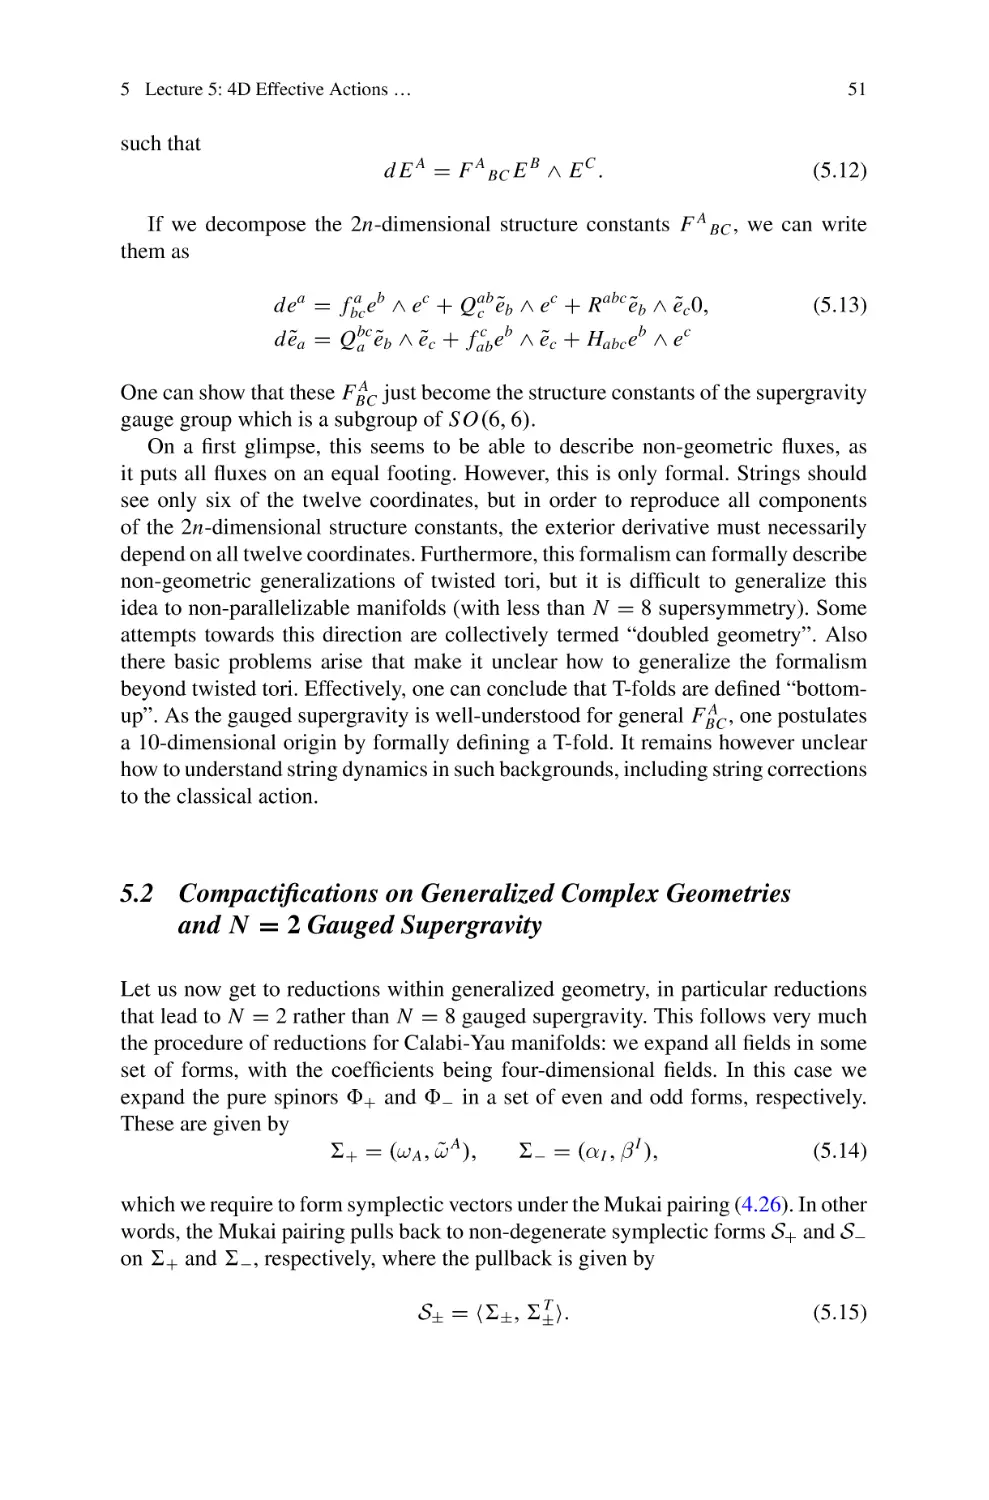 5.2 Compactifications on Generalized Complex Geometries and N=2 Gauged Supergravity